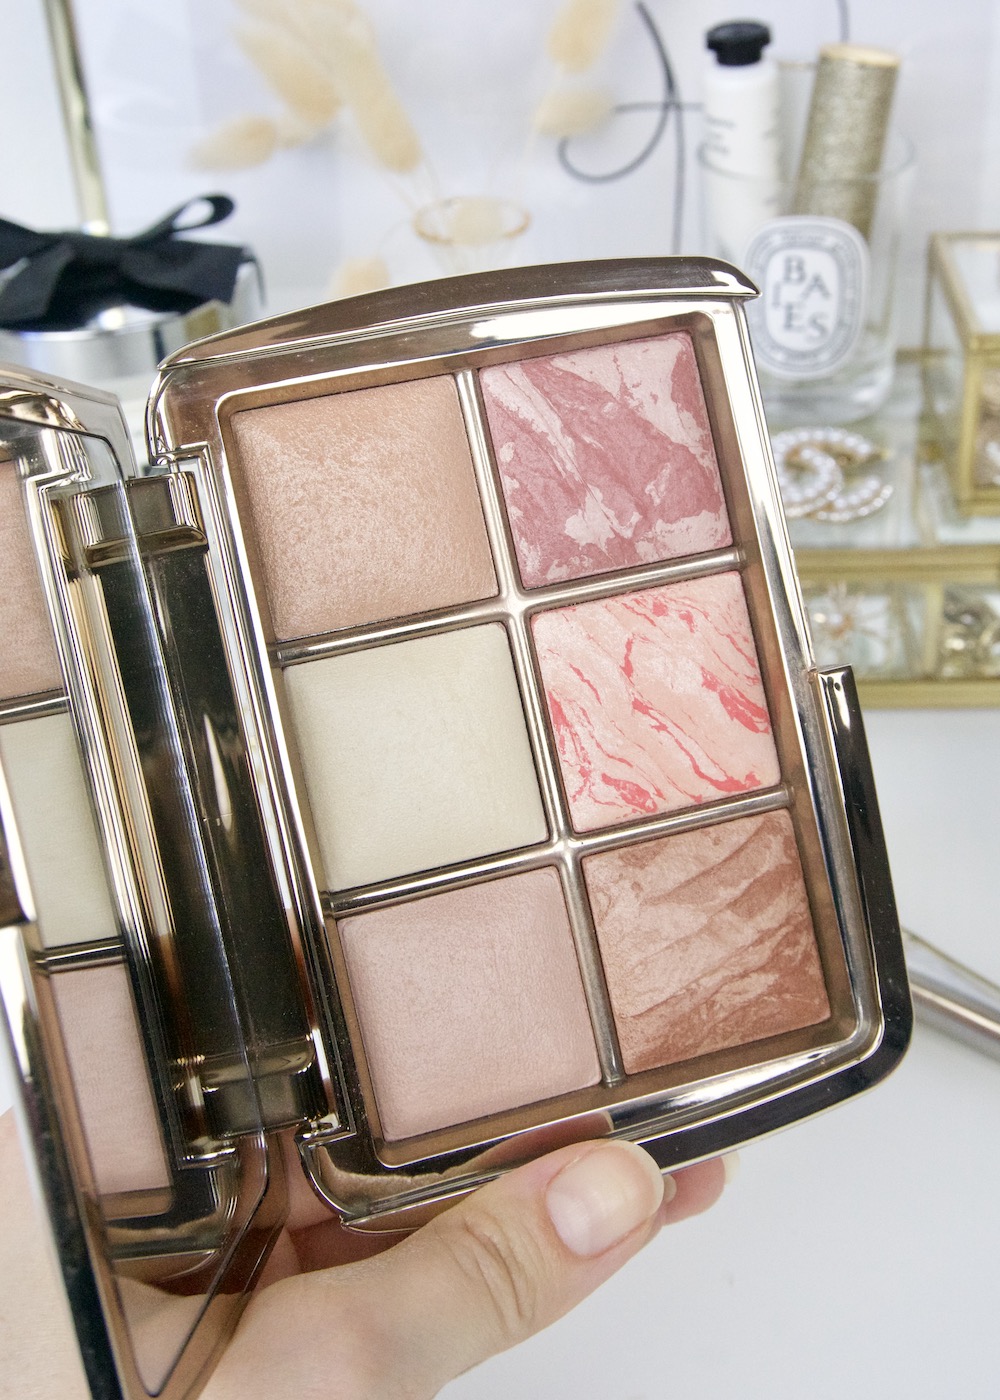 Hourglass Cosmetics Ambient Lighting Holiday Palette Edit Sculpture in hand